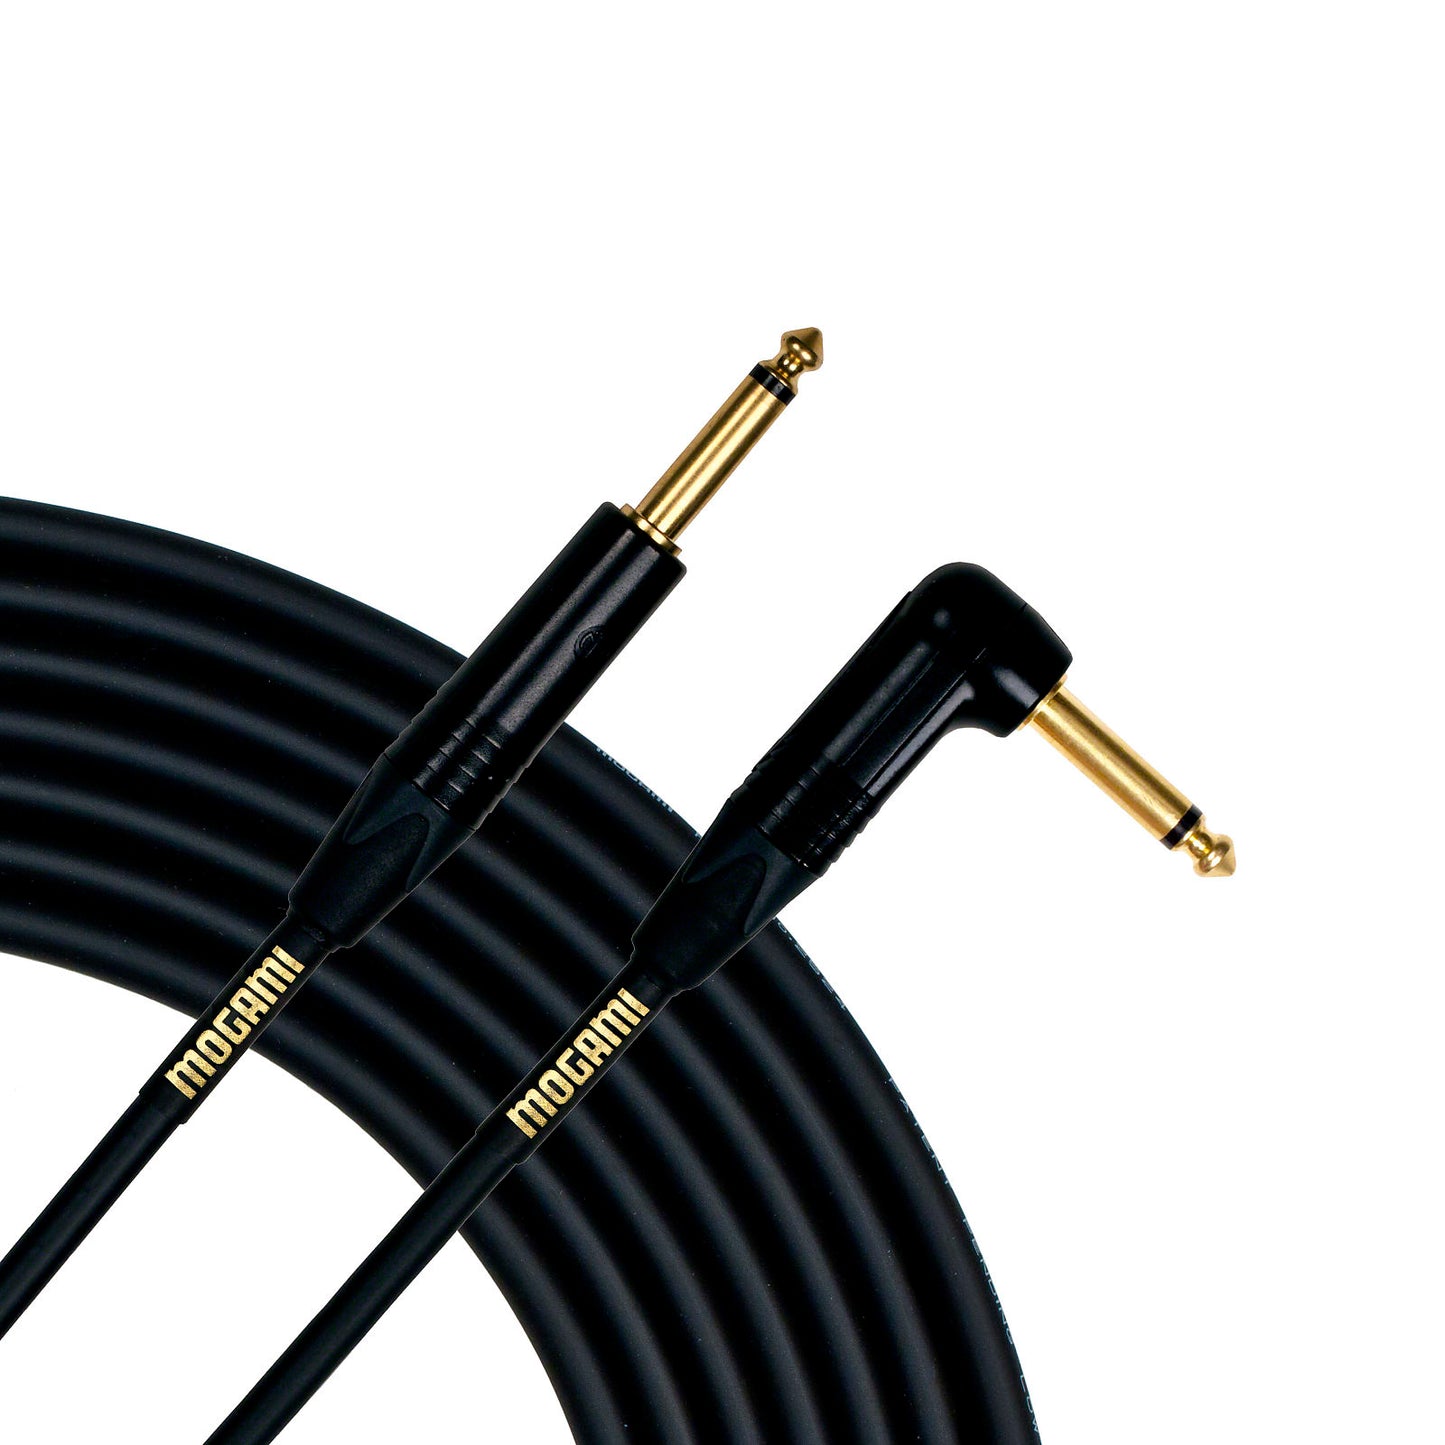 Mogami Gold Guitar/Instrument Cable (Straight to Right Angle End), 3 Foot